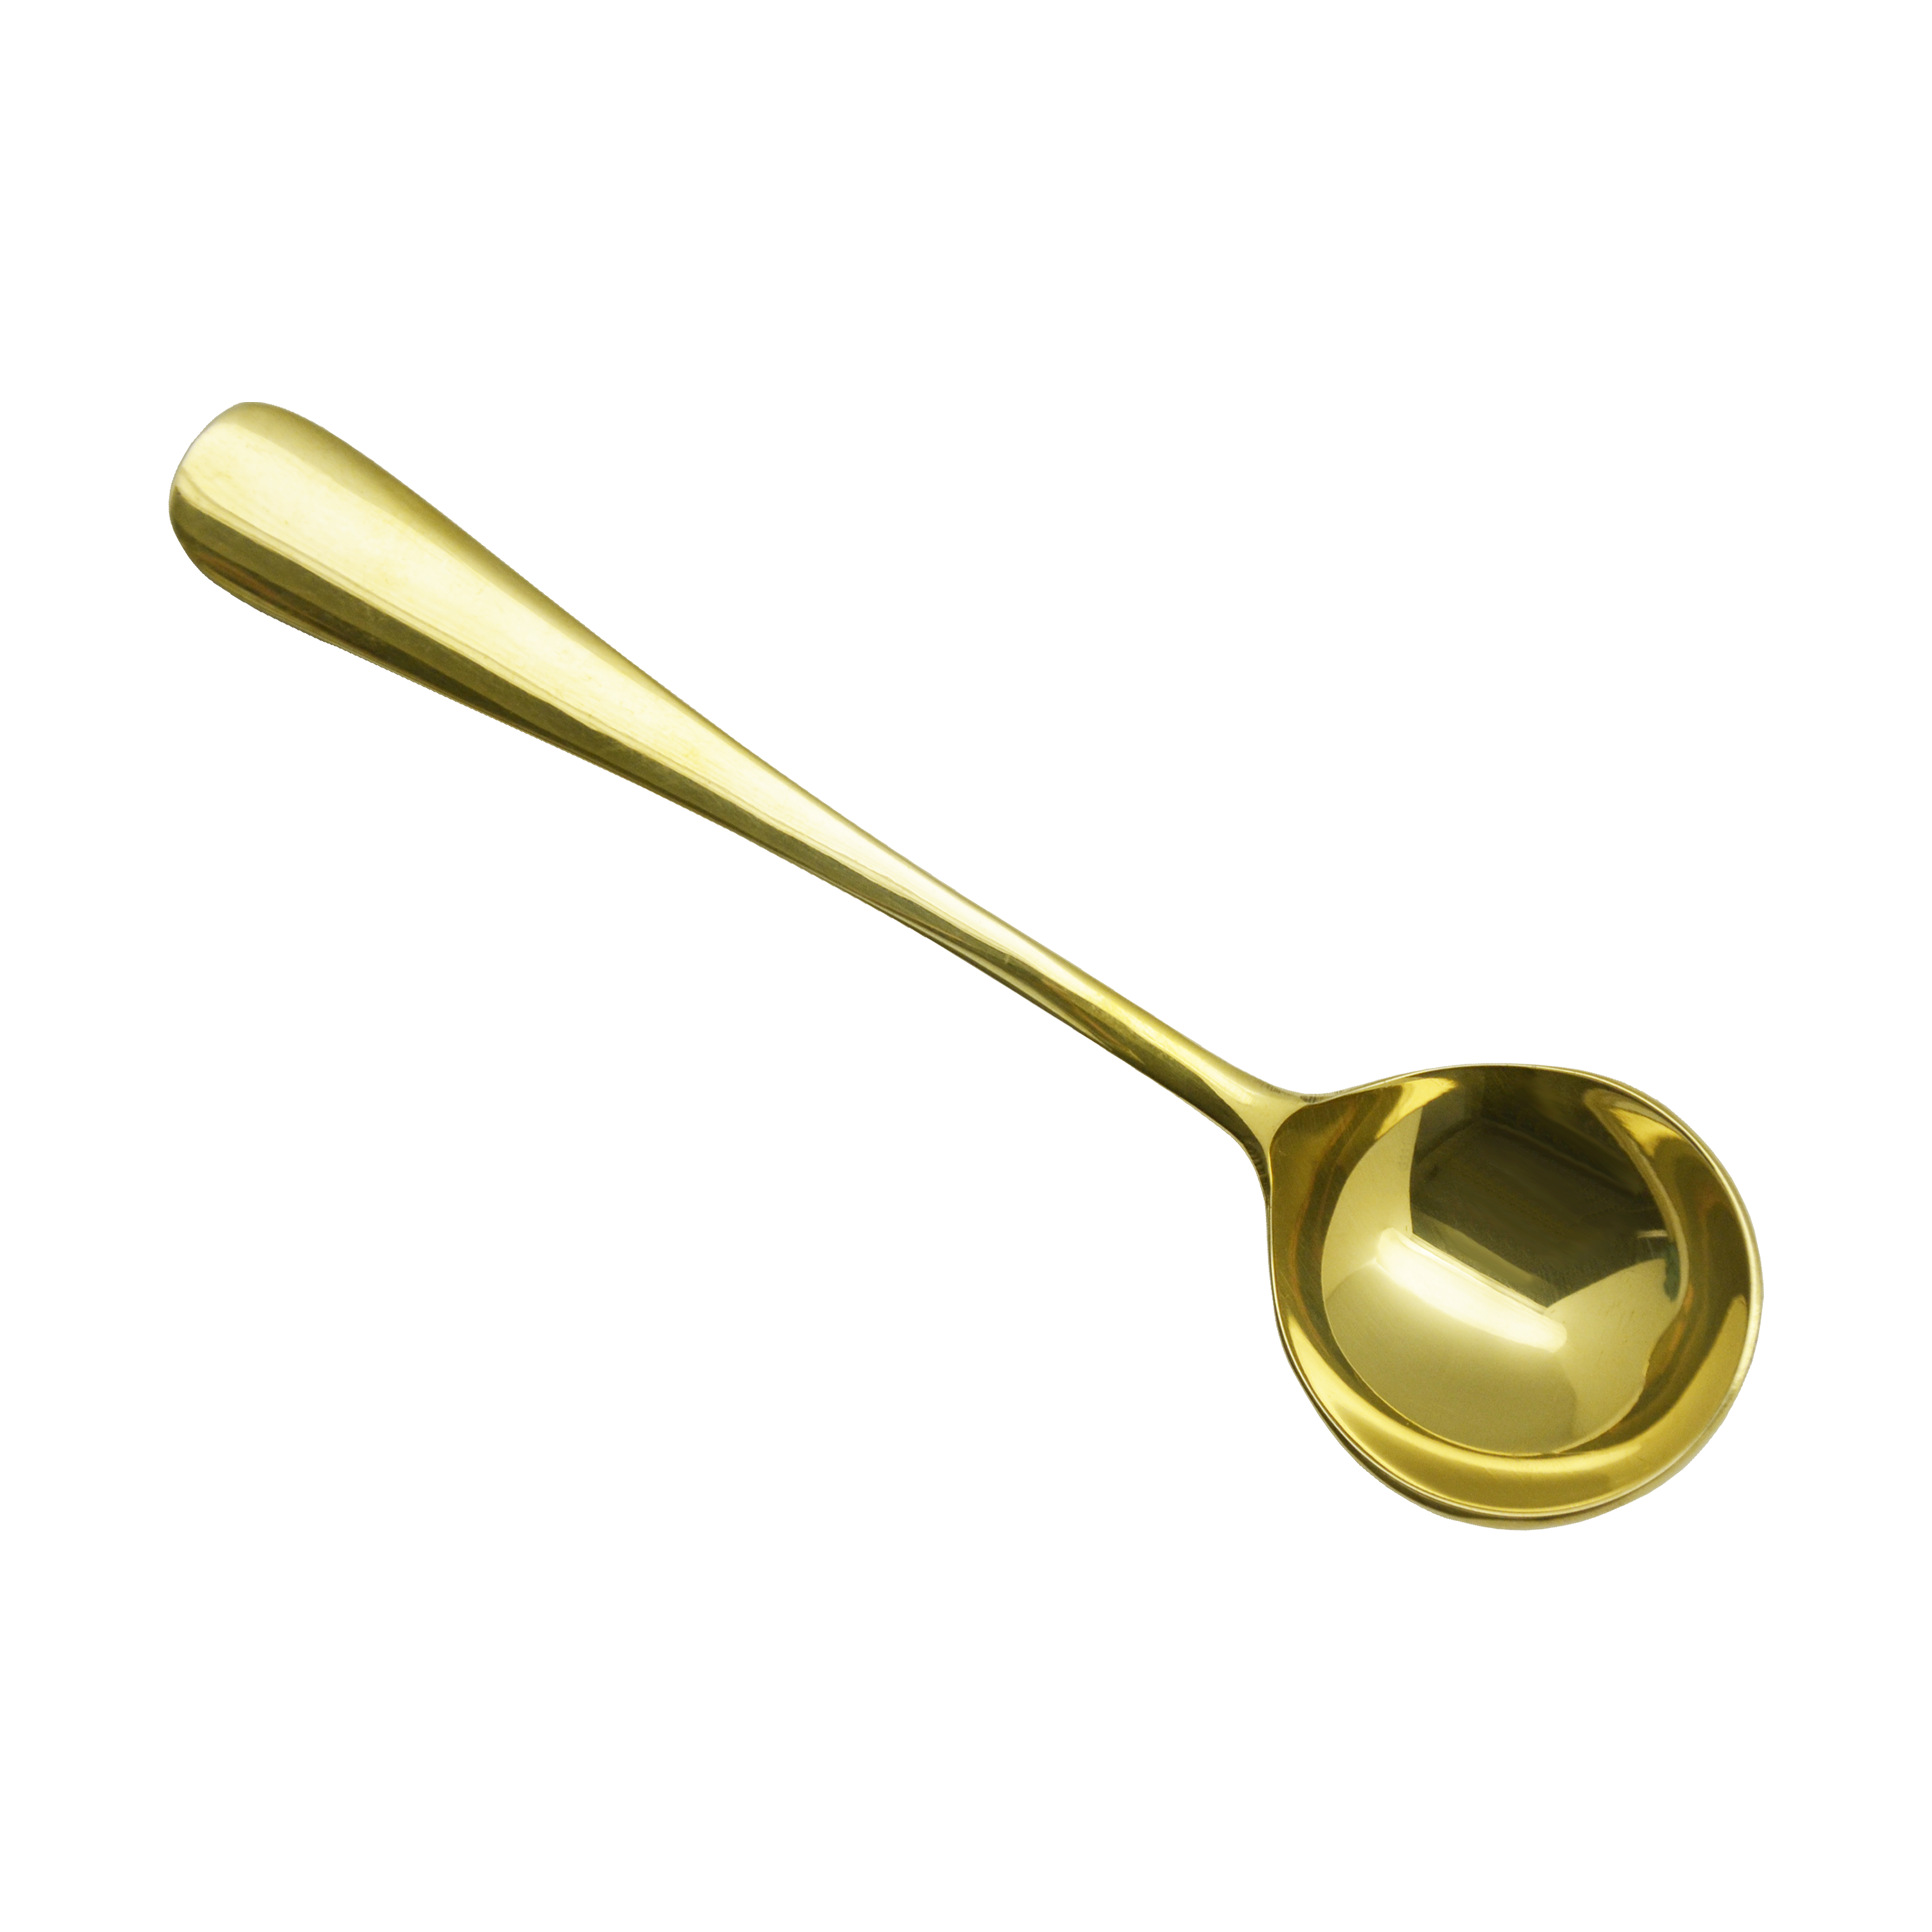 https://barobjects.com/wp-content/uploads/2022/11/Coffee-Cupping-Spoon-Vibrant-Gold.png